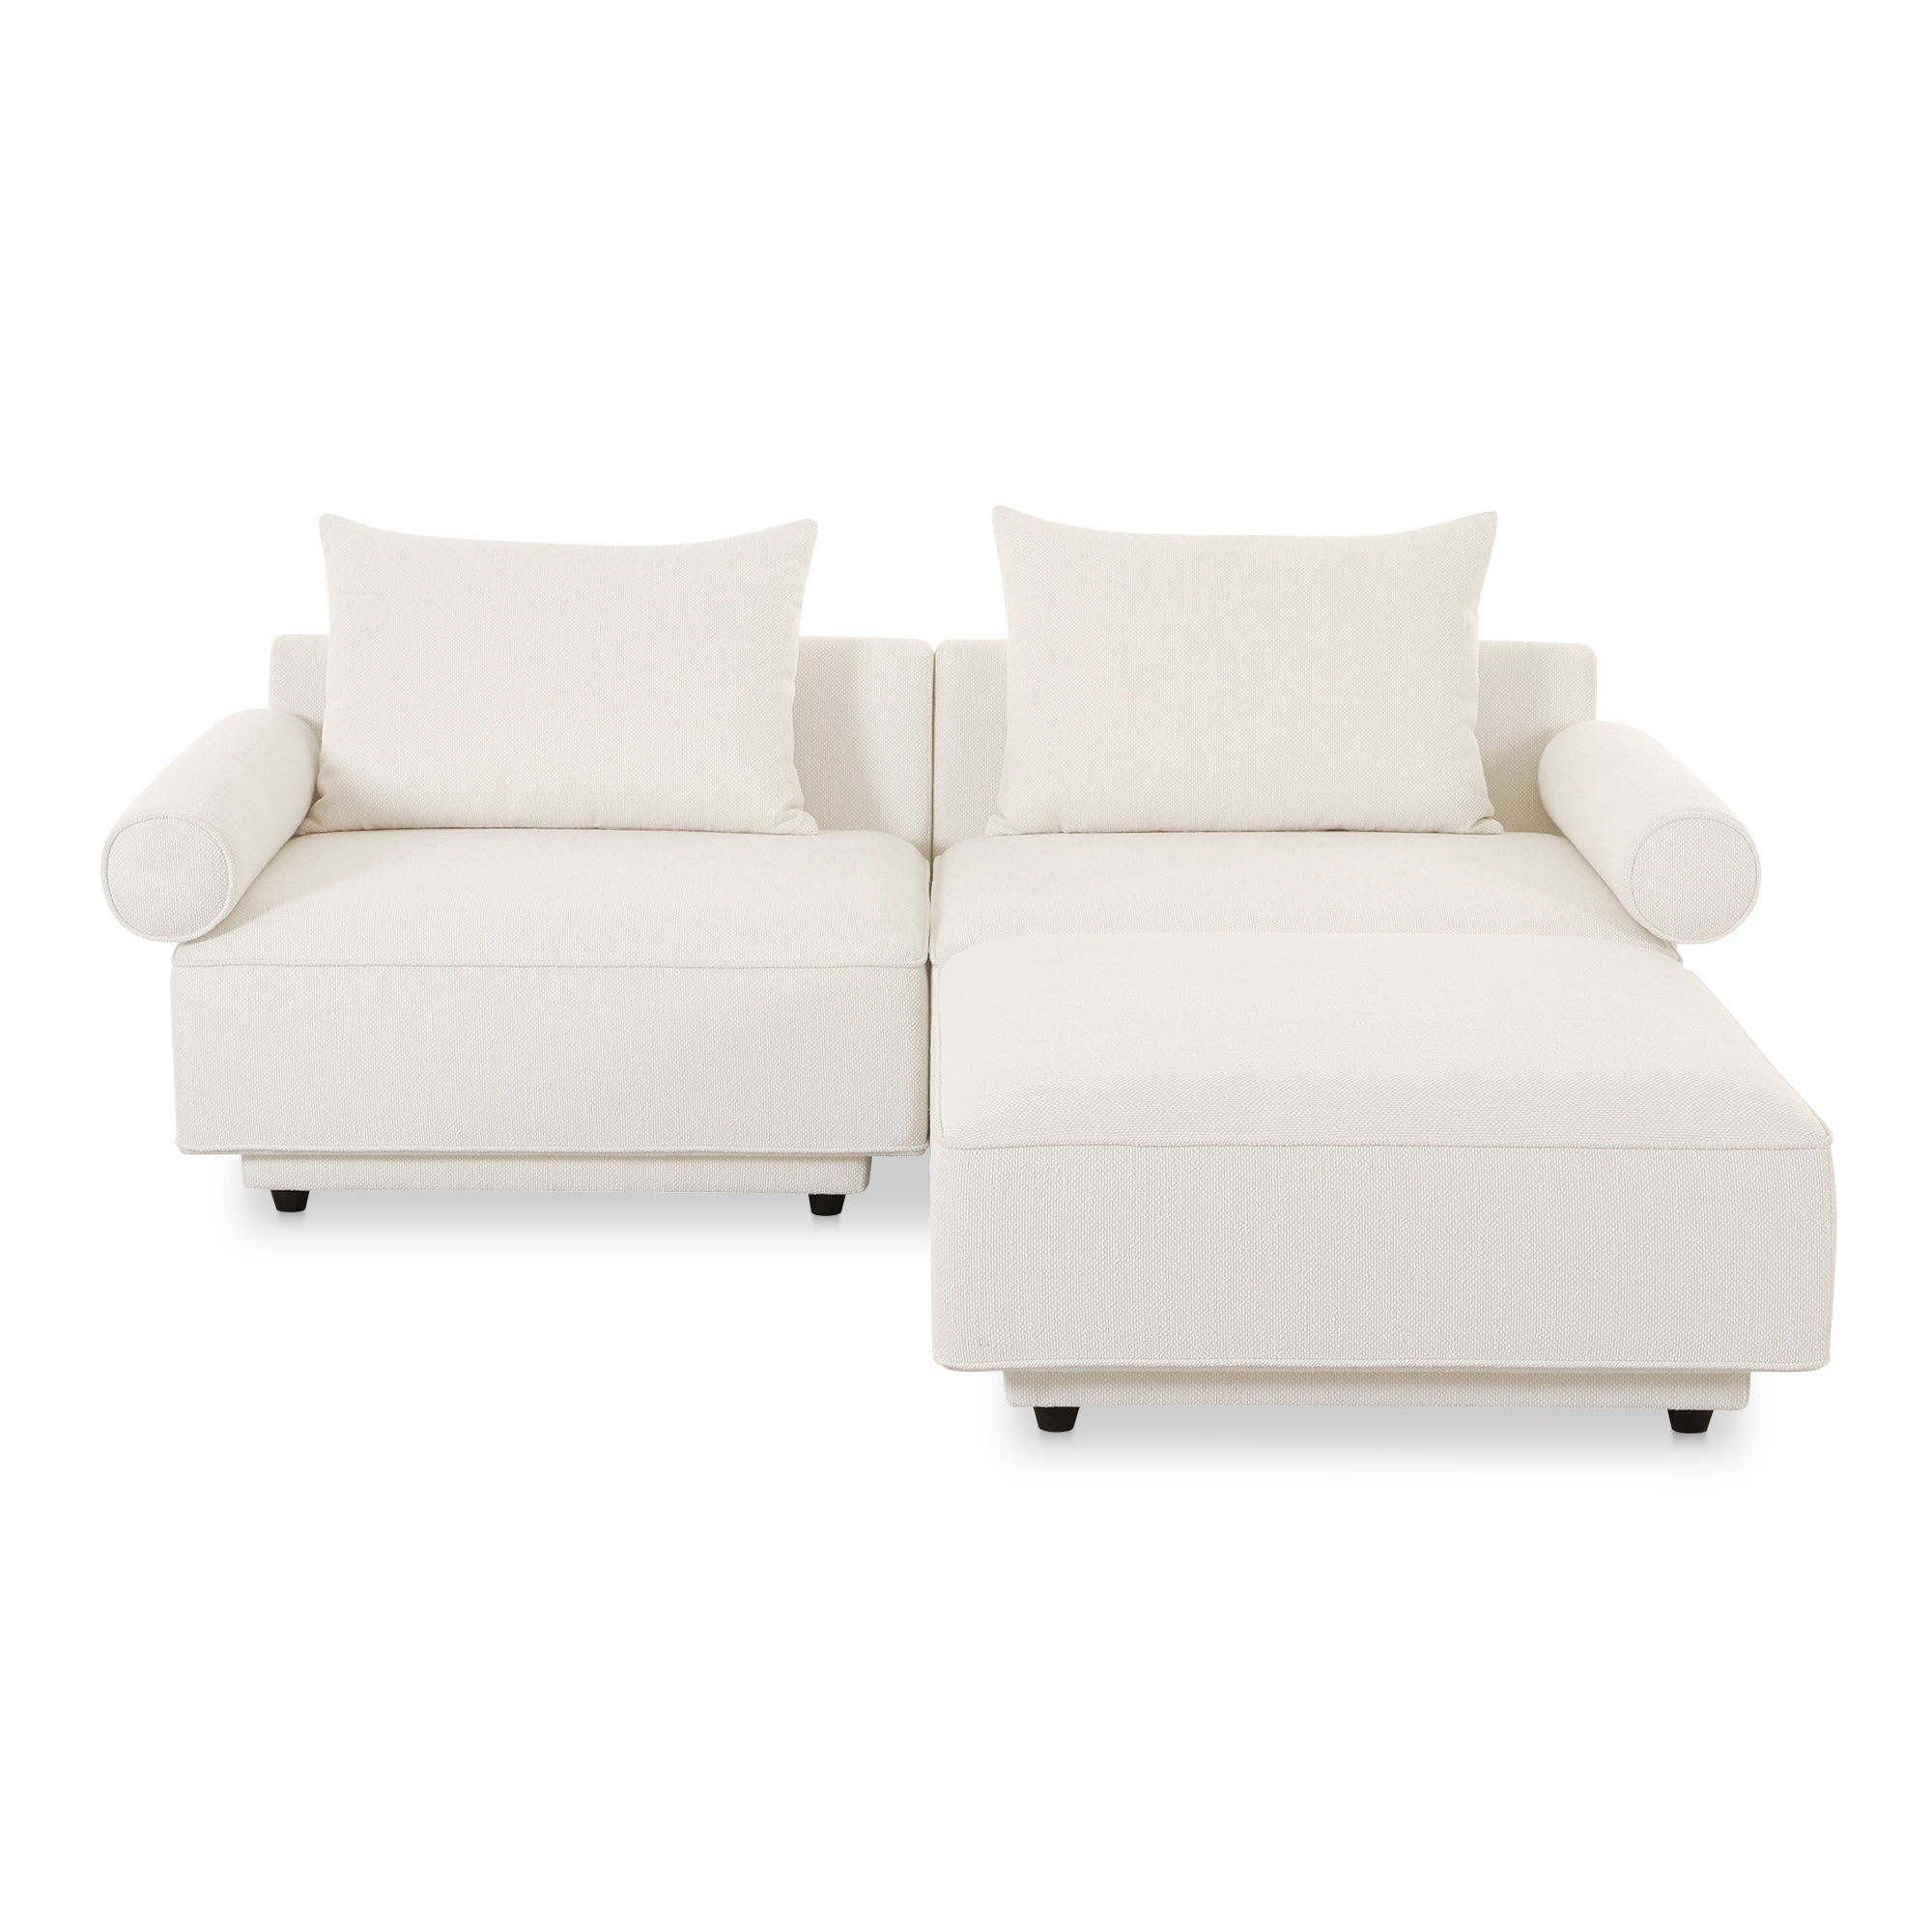 Rosello - Nook Modular Sectional - White-Stationary Sectionals-American Furniture Outlet